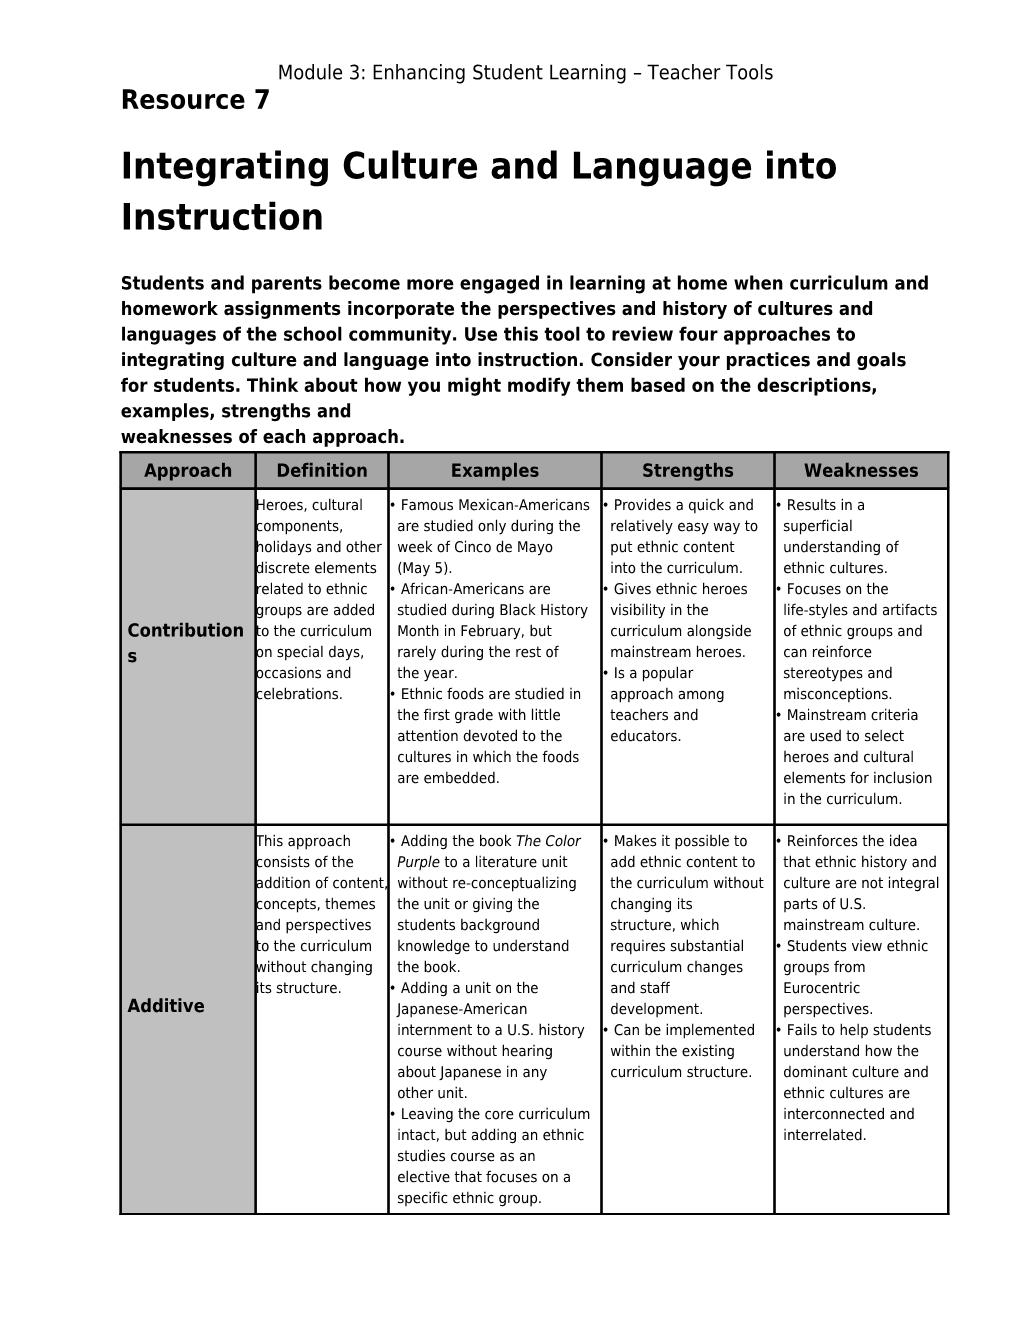 Integrating Culture and Language Into Instruction